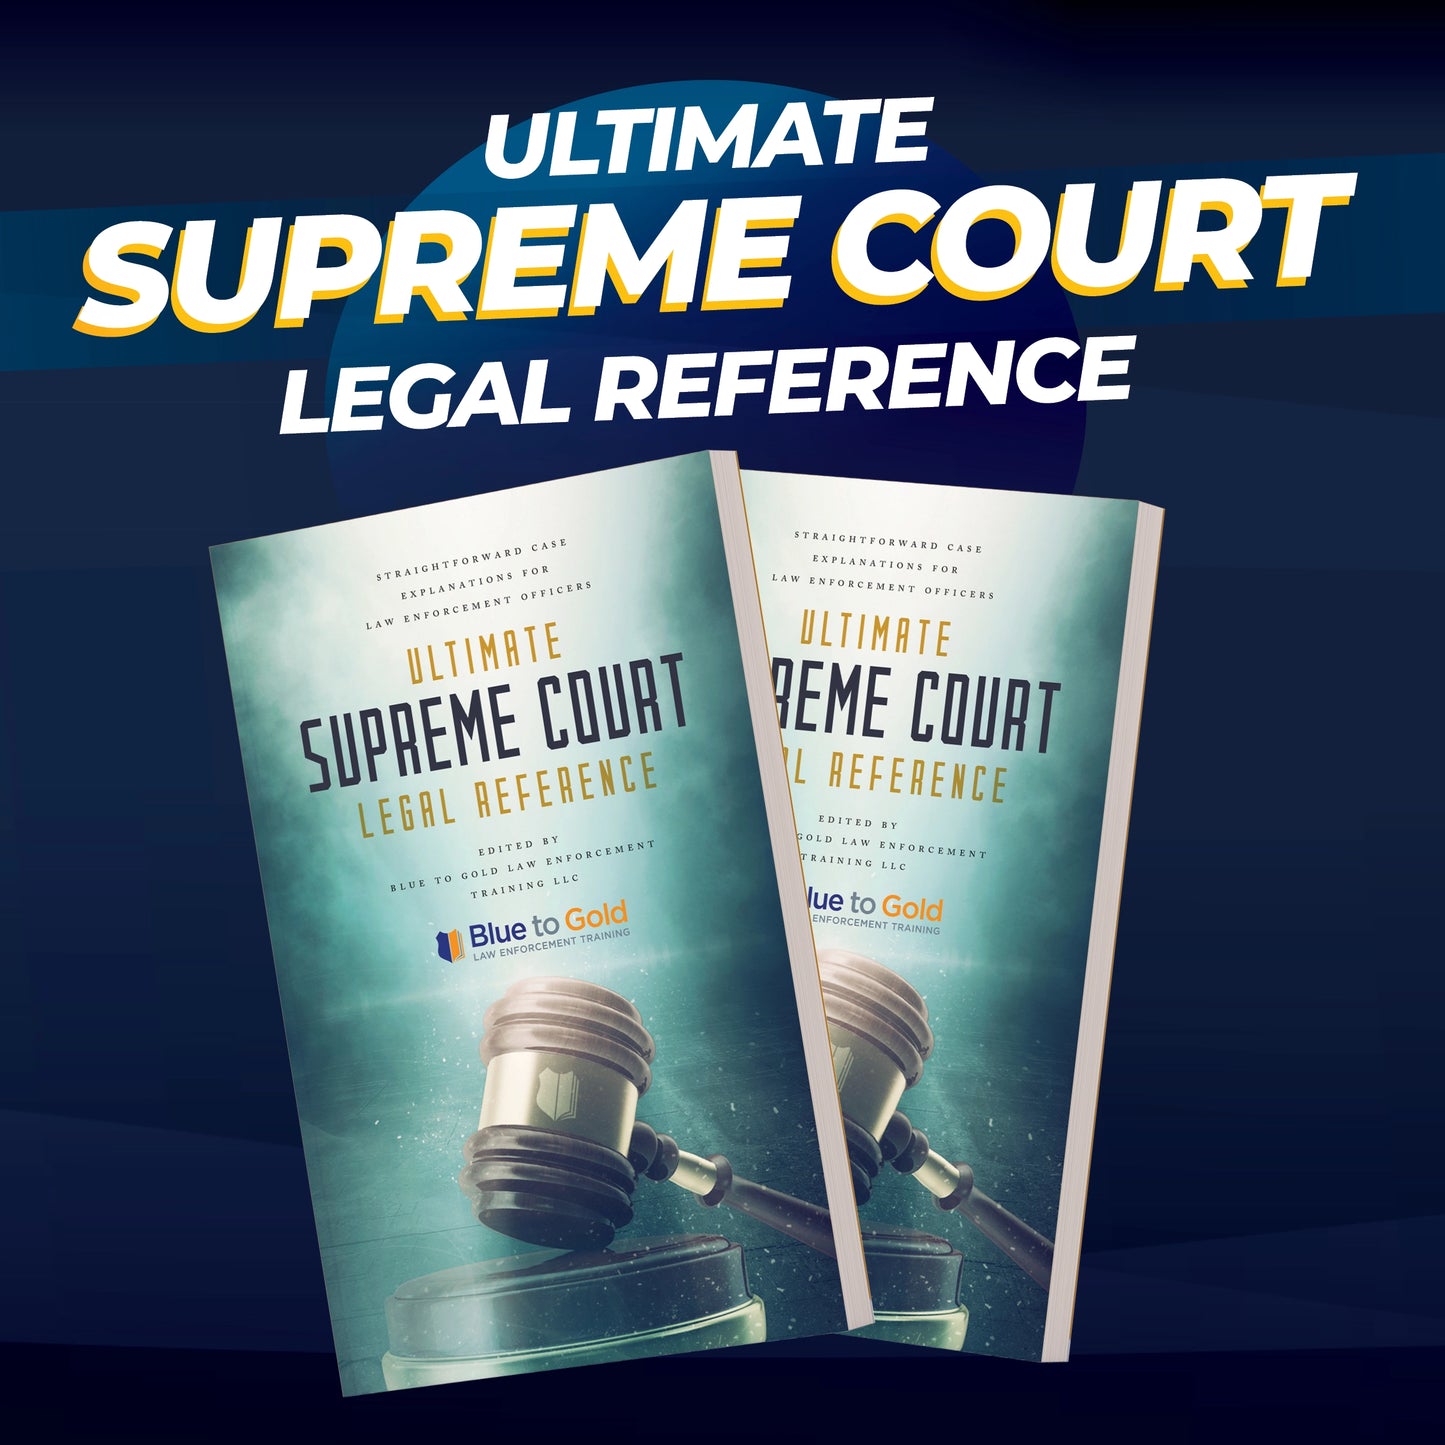 Ultimate Supreme Court Legal Reference